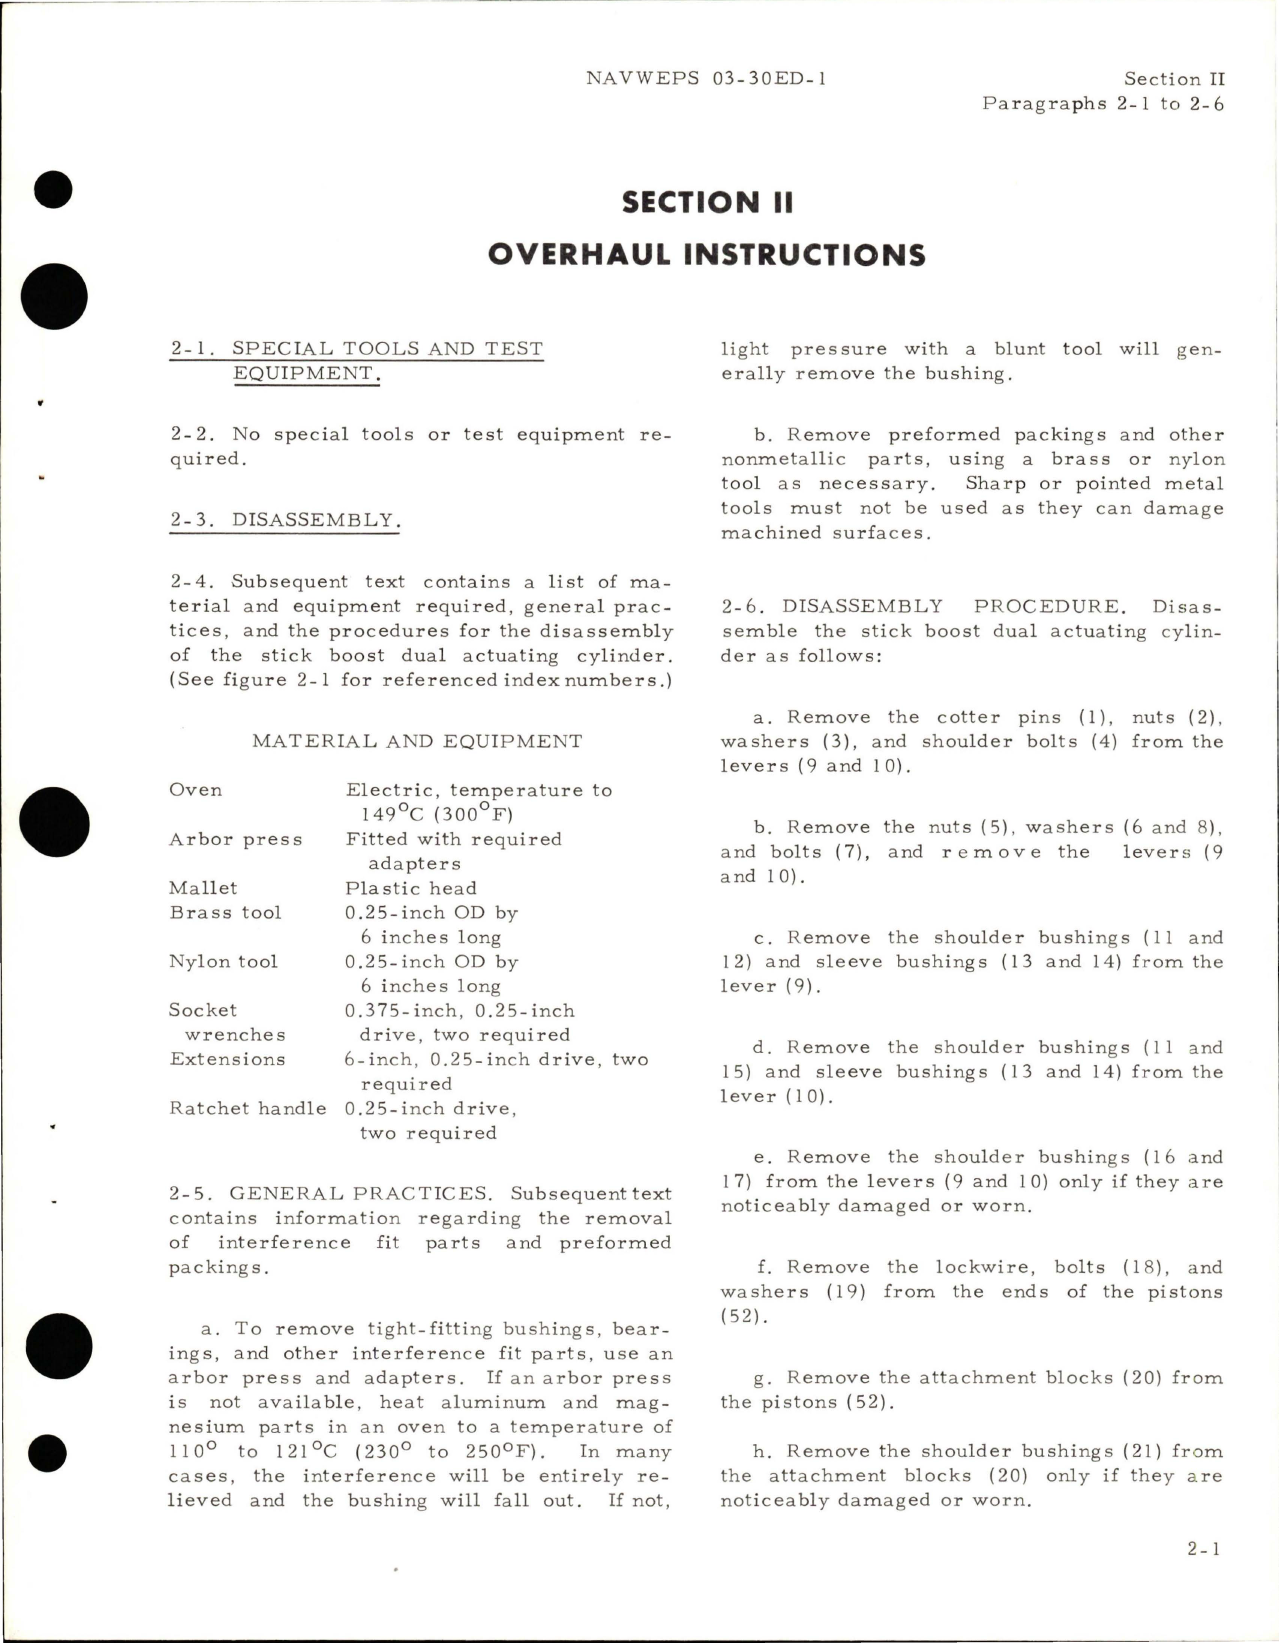 Sample page 7 from AirCorps Library document: Overhaul Instructions for Stick Boost Dual Actuating Cylinder - Part 114H5600-11 and 114H5600-12